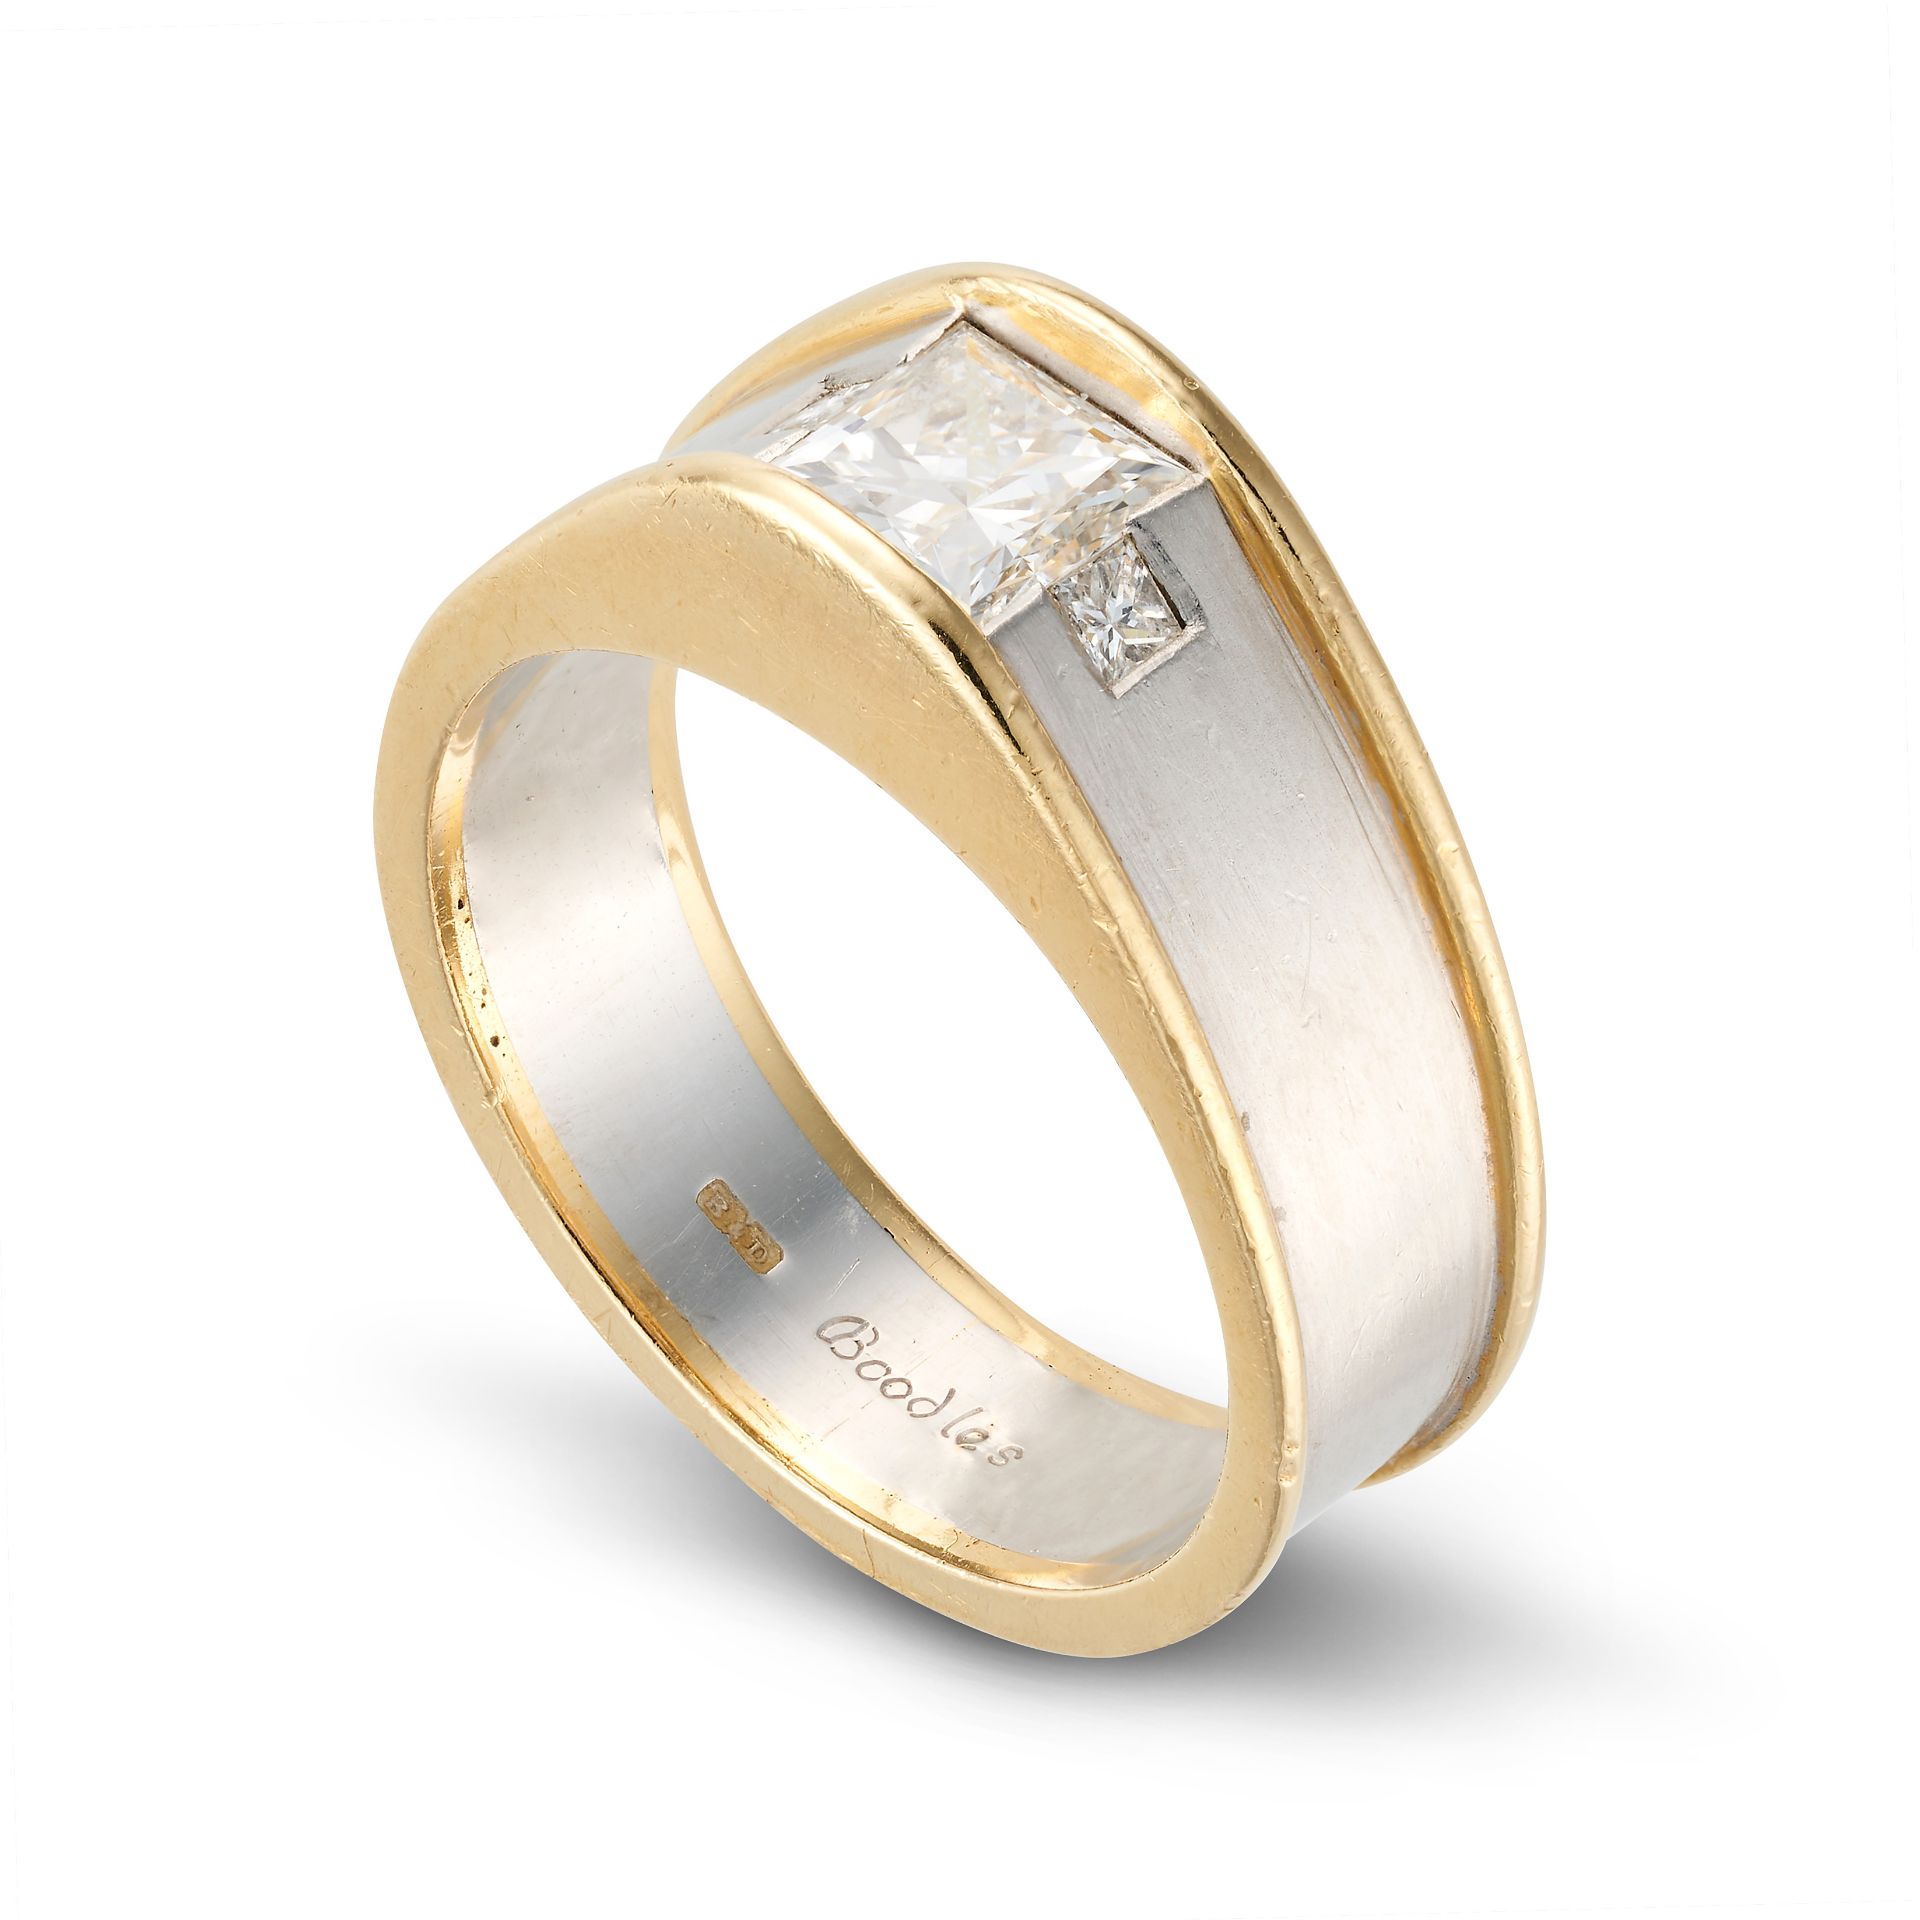 BOODLE & DUNTHORNE, A DIAMOND RING in 18ct white and yellow gold, set with a princess cut diamond... - Image 2 of 2